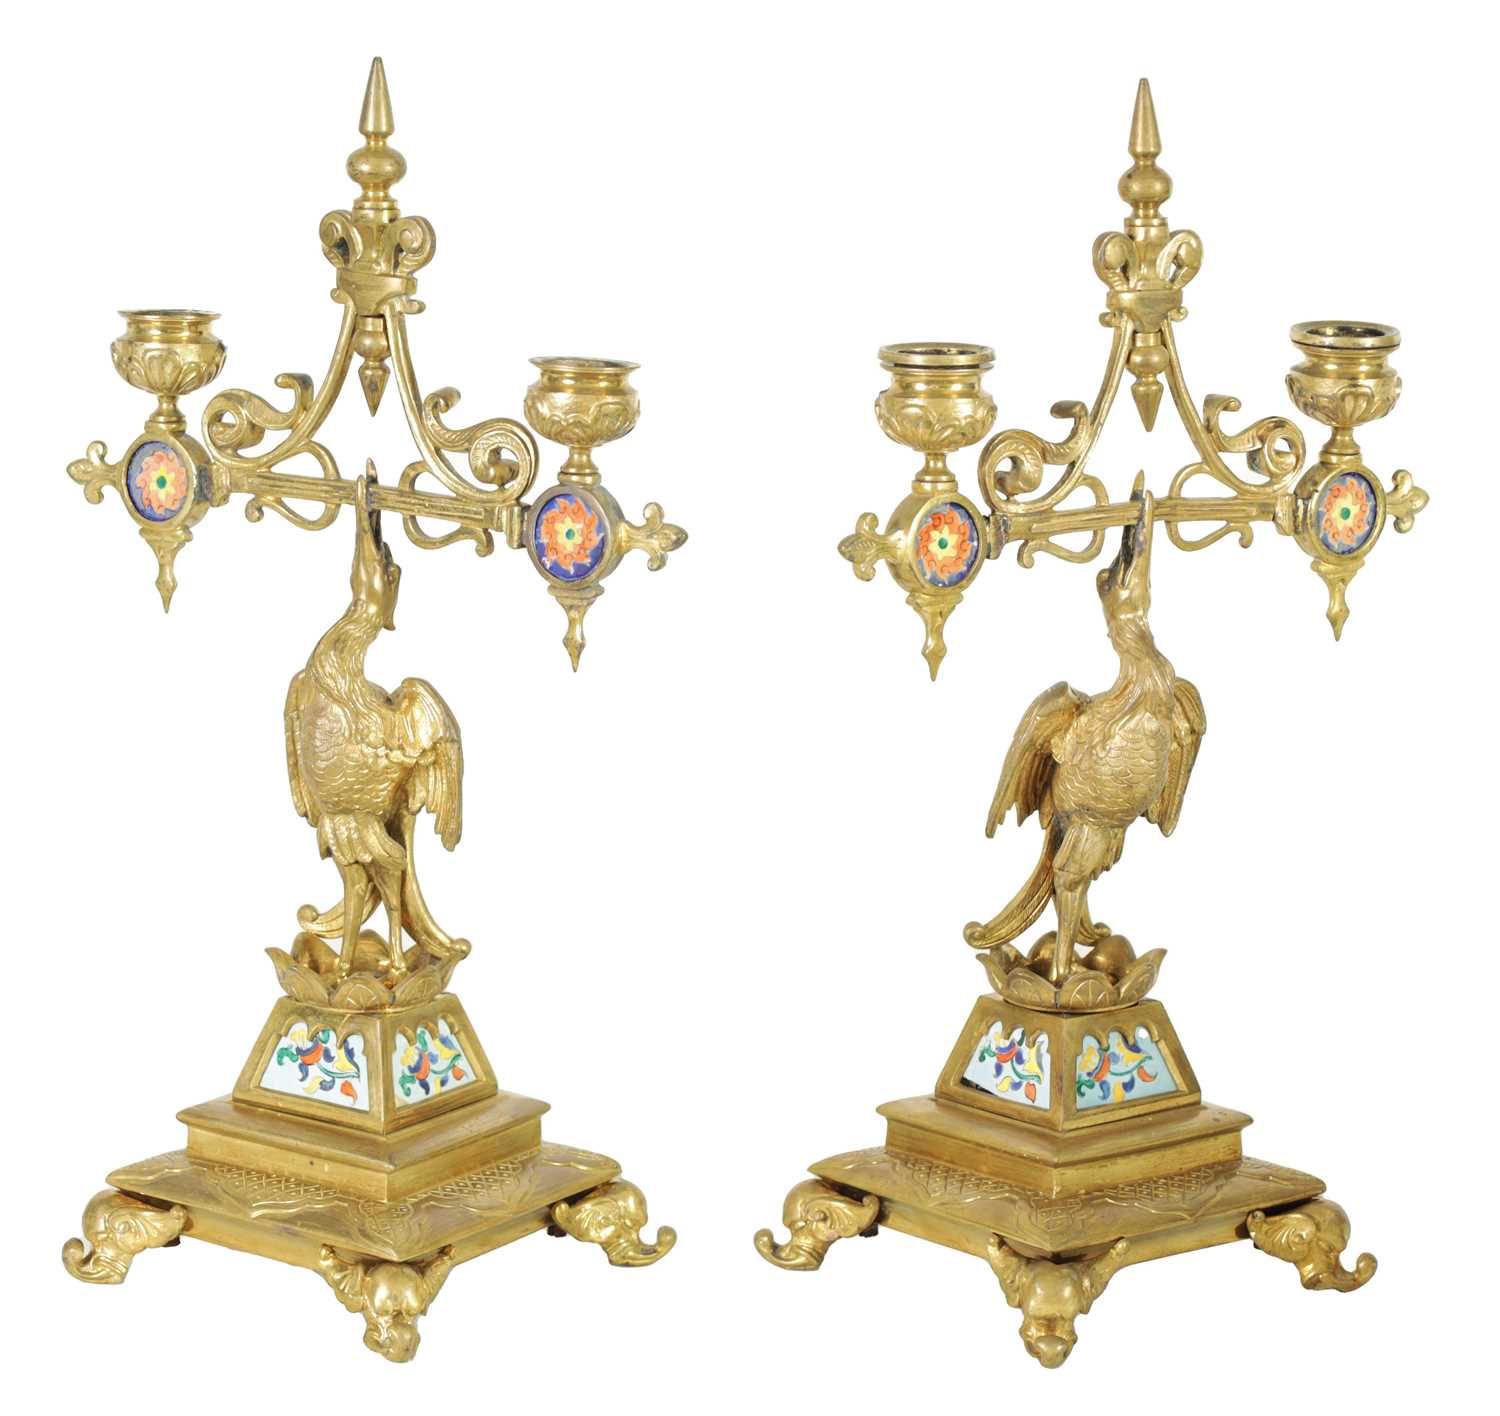 A PAIR OF LATE 19TH CENTURY BRASS AESTHETIC PERIOD DOUBLE BRANCH CANDELABRA